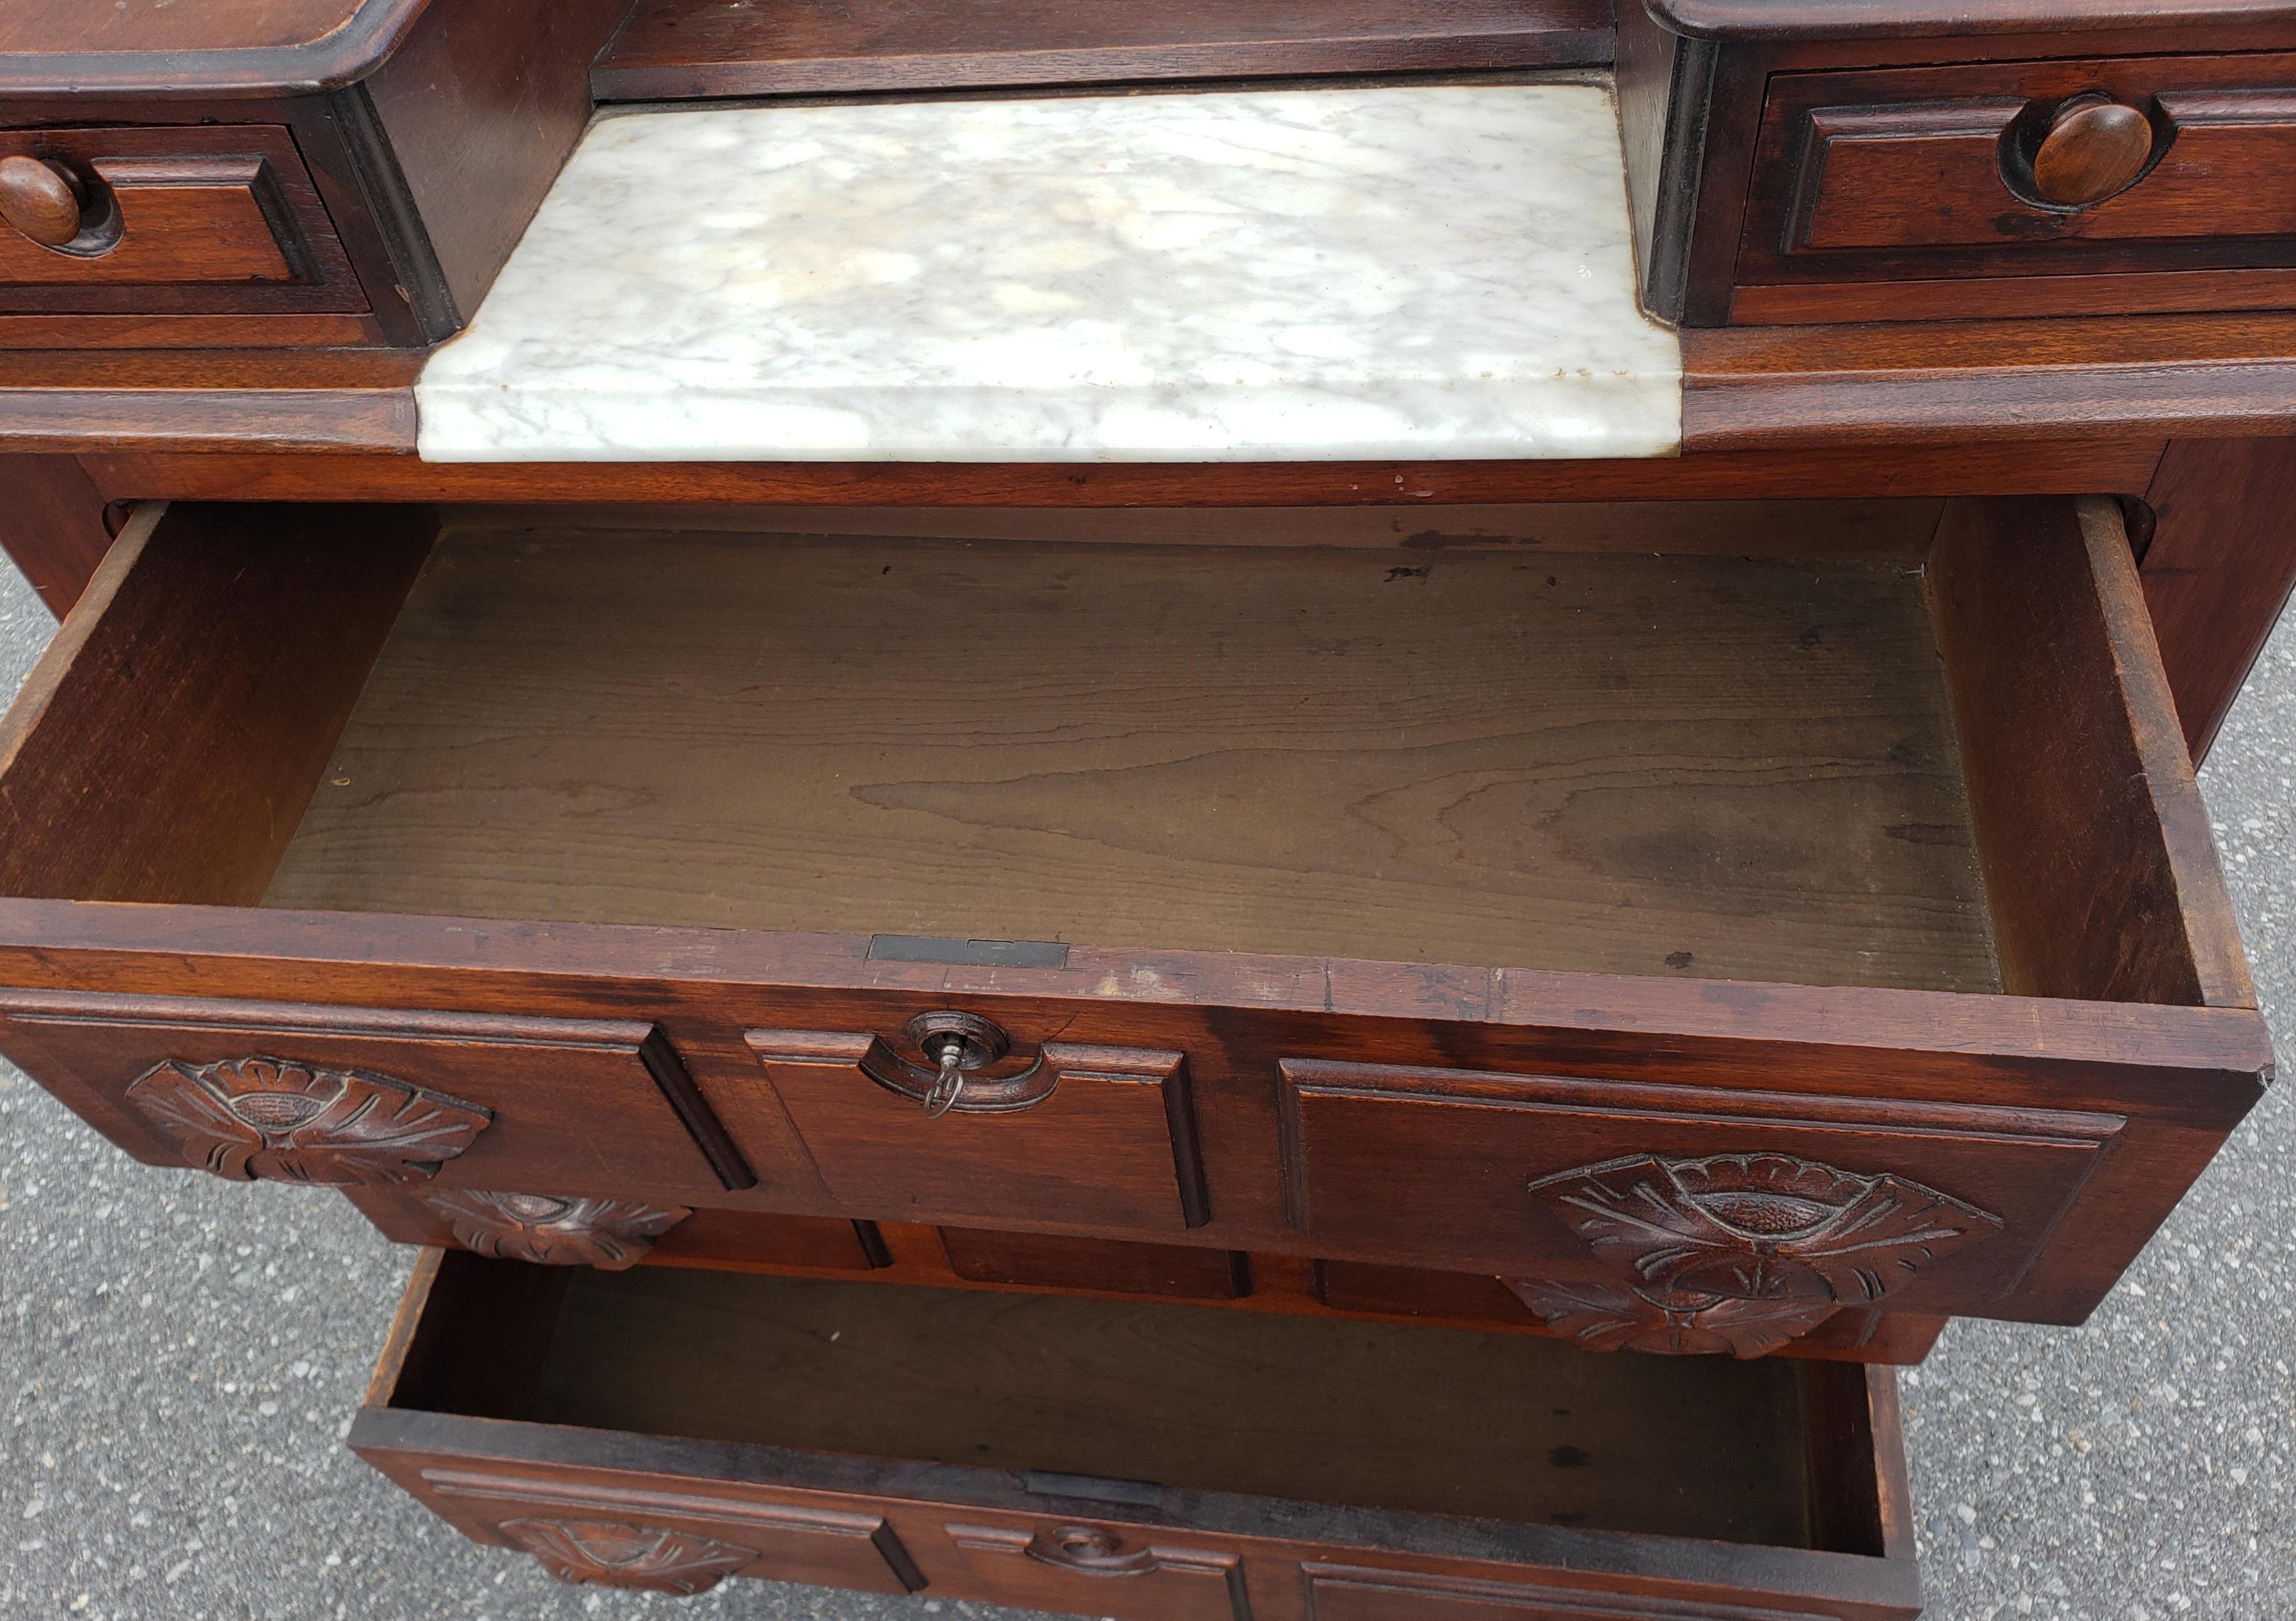 19th Century 19th C. American Empire Eastlake Mahogany Dresser w/ Marble Top Inset and Mirror For Sale